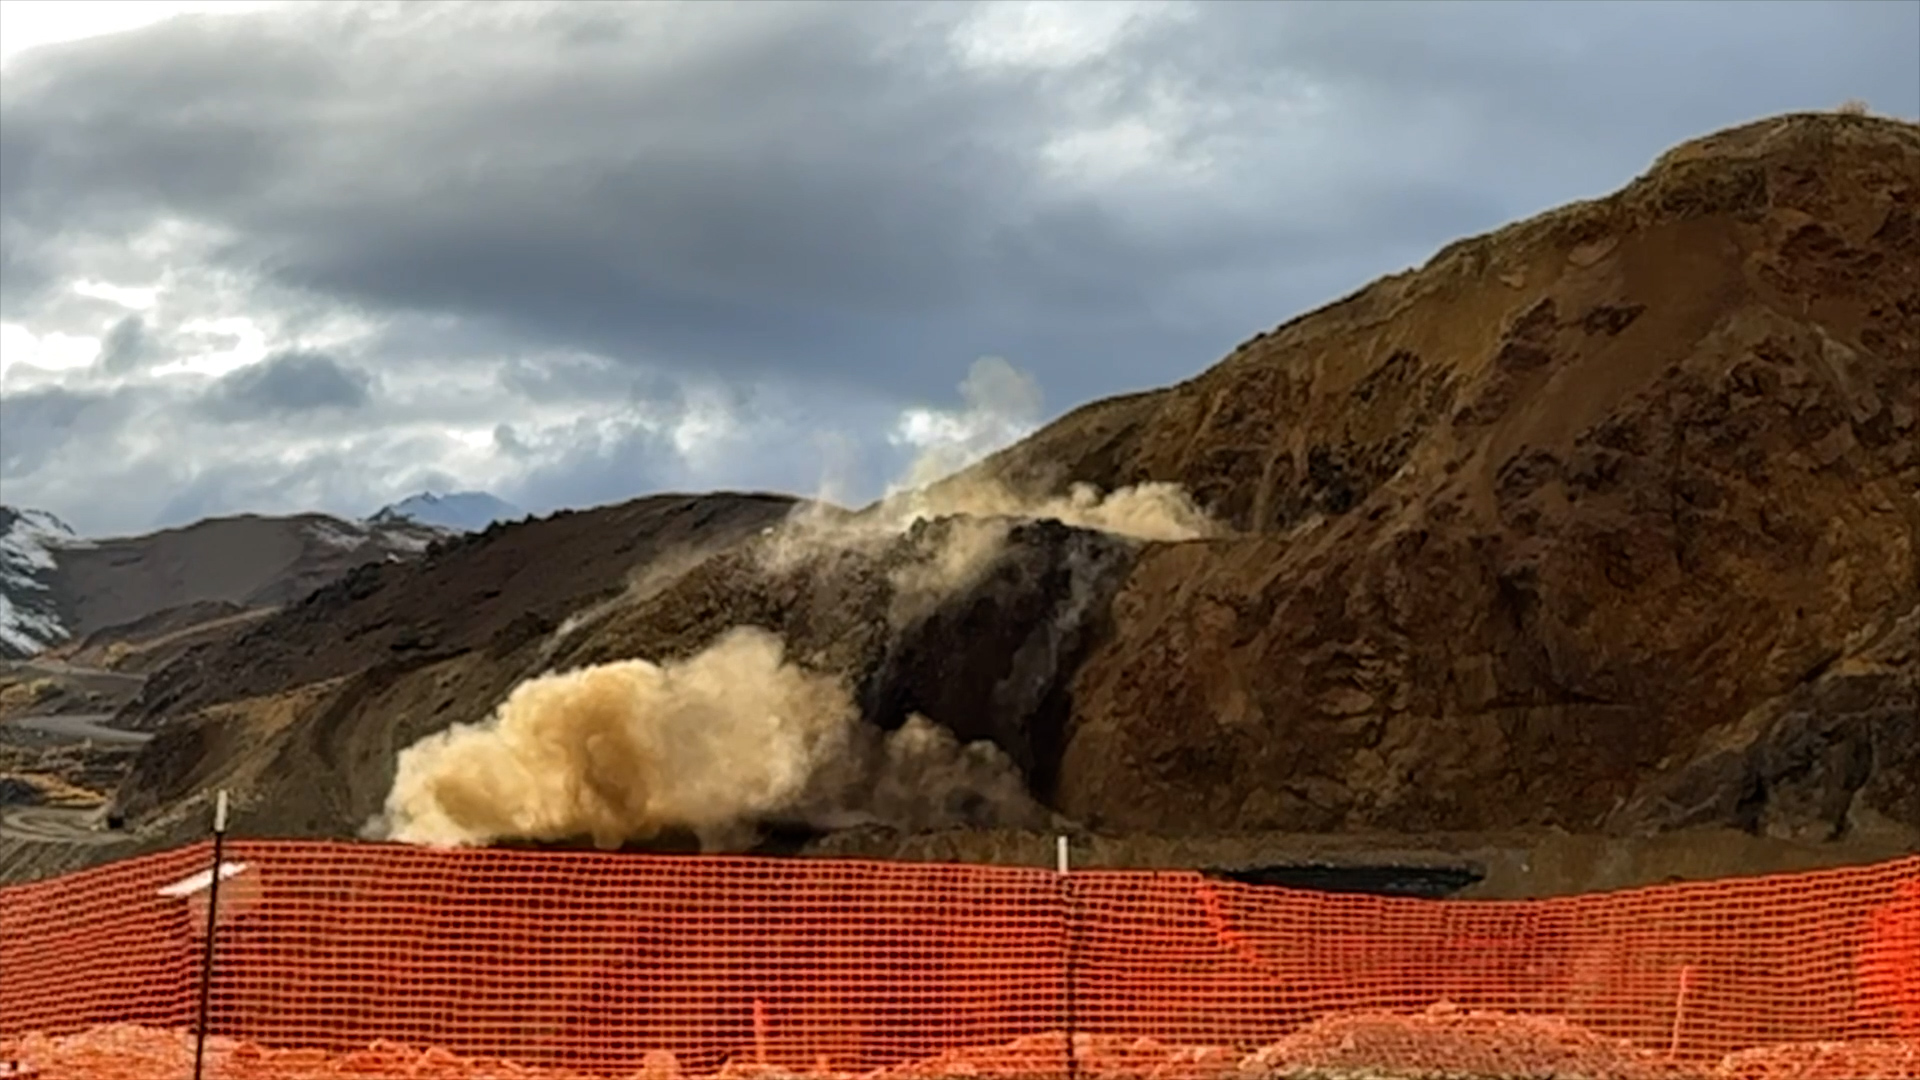 Behind an orange construction fence, a dust cloud rises from a rocky slope that has just been blasted.